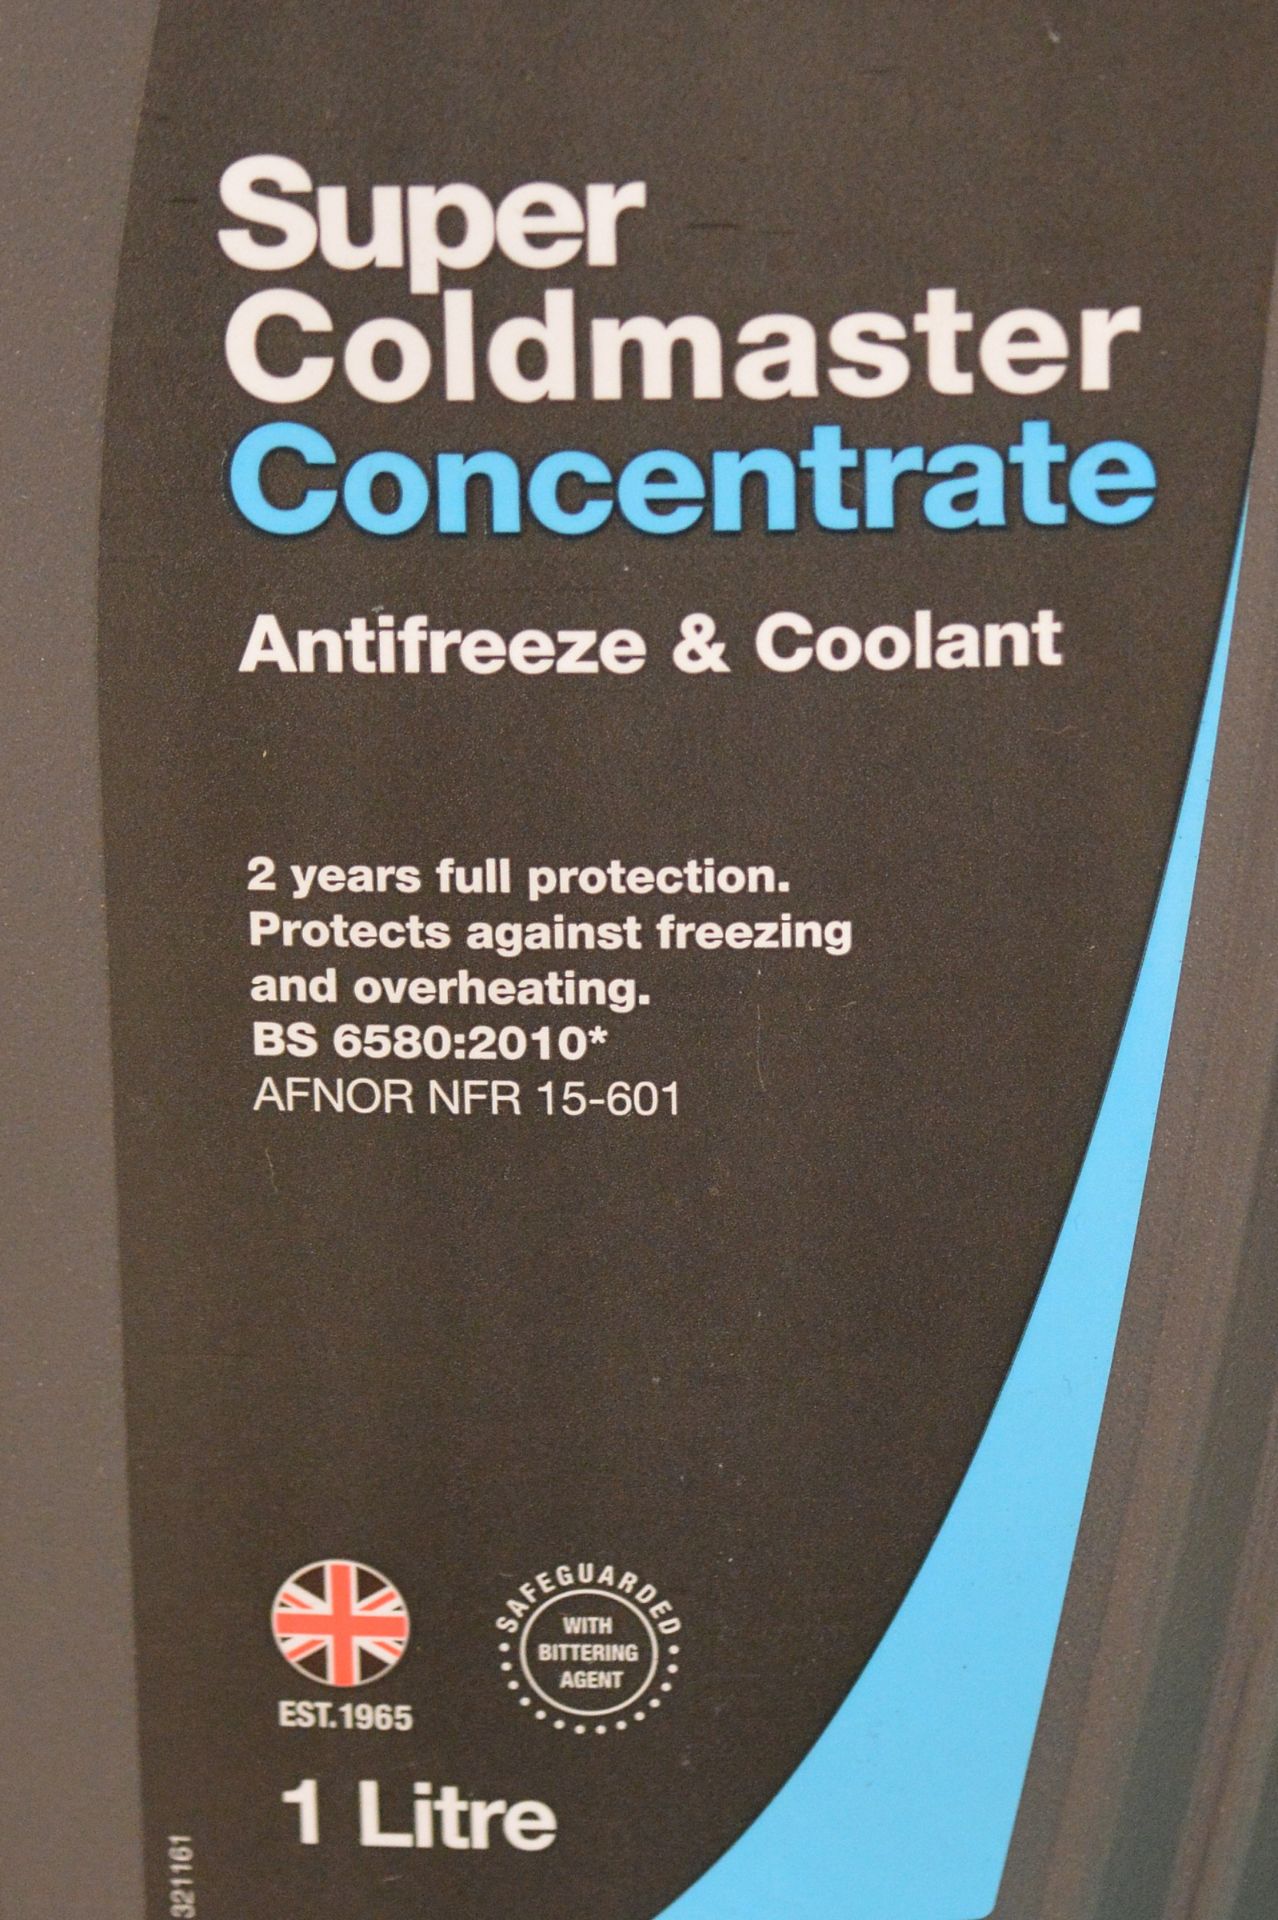 6x Comma Super Coldmaster concentrate Antifreeze and coolant - 1L - Image 2 of 3